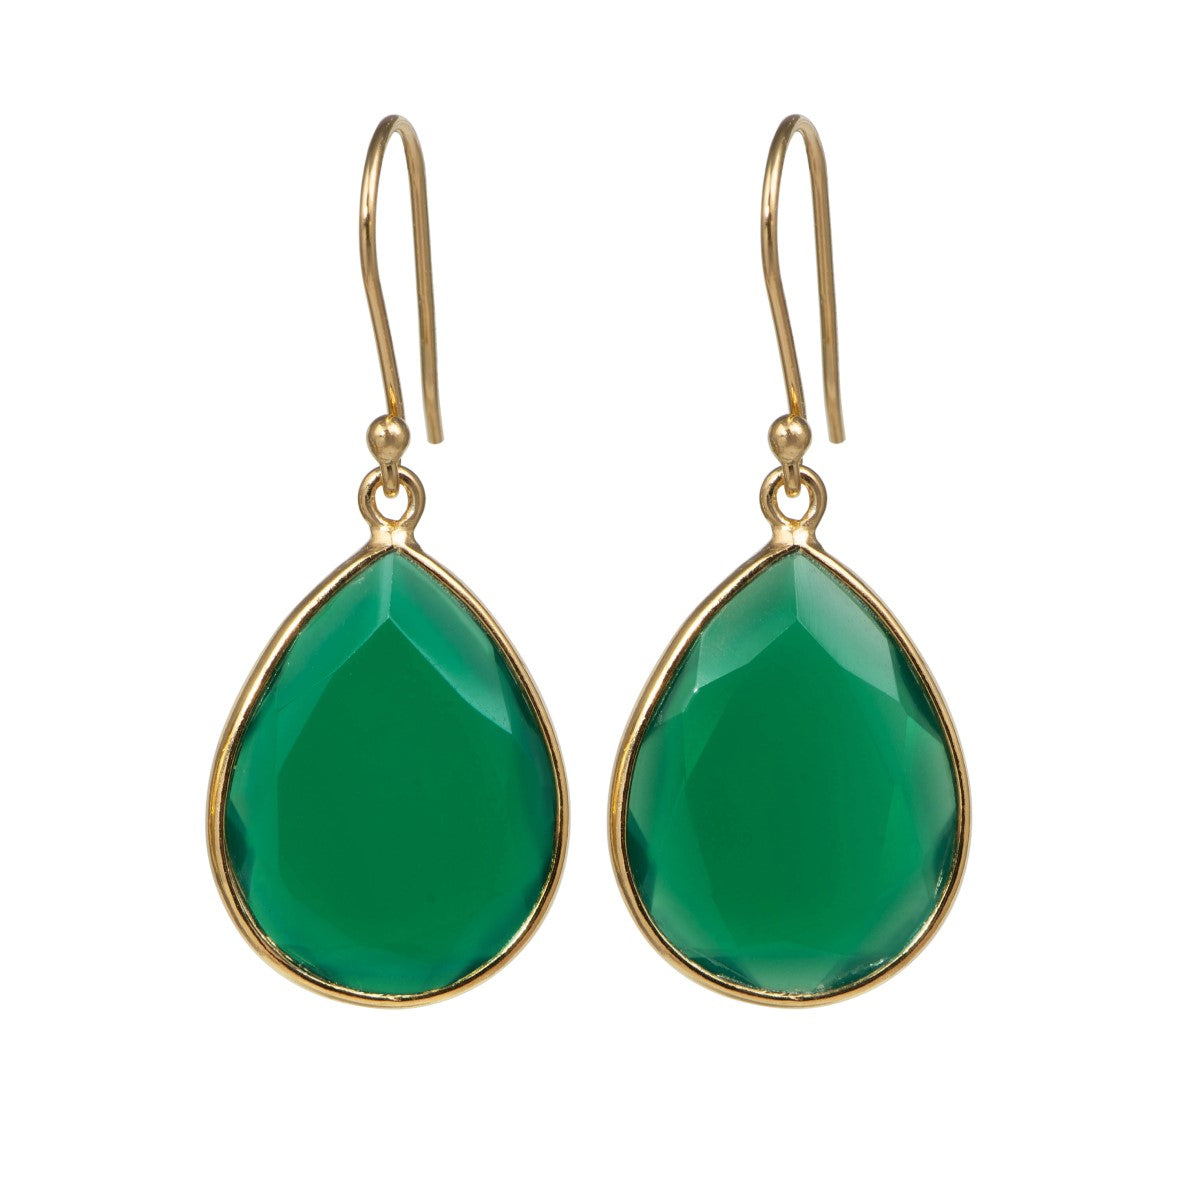 Green Onyx Gold Plated Sterling Silver Earrings with a Tear Drop Shaped Gemstone